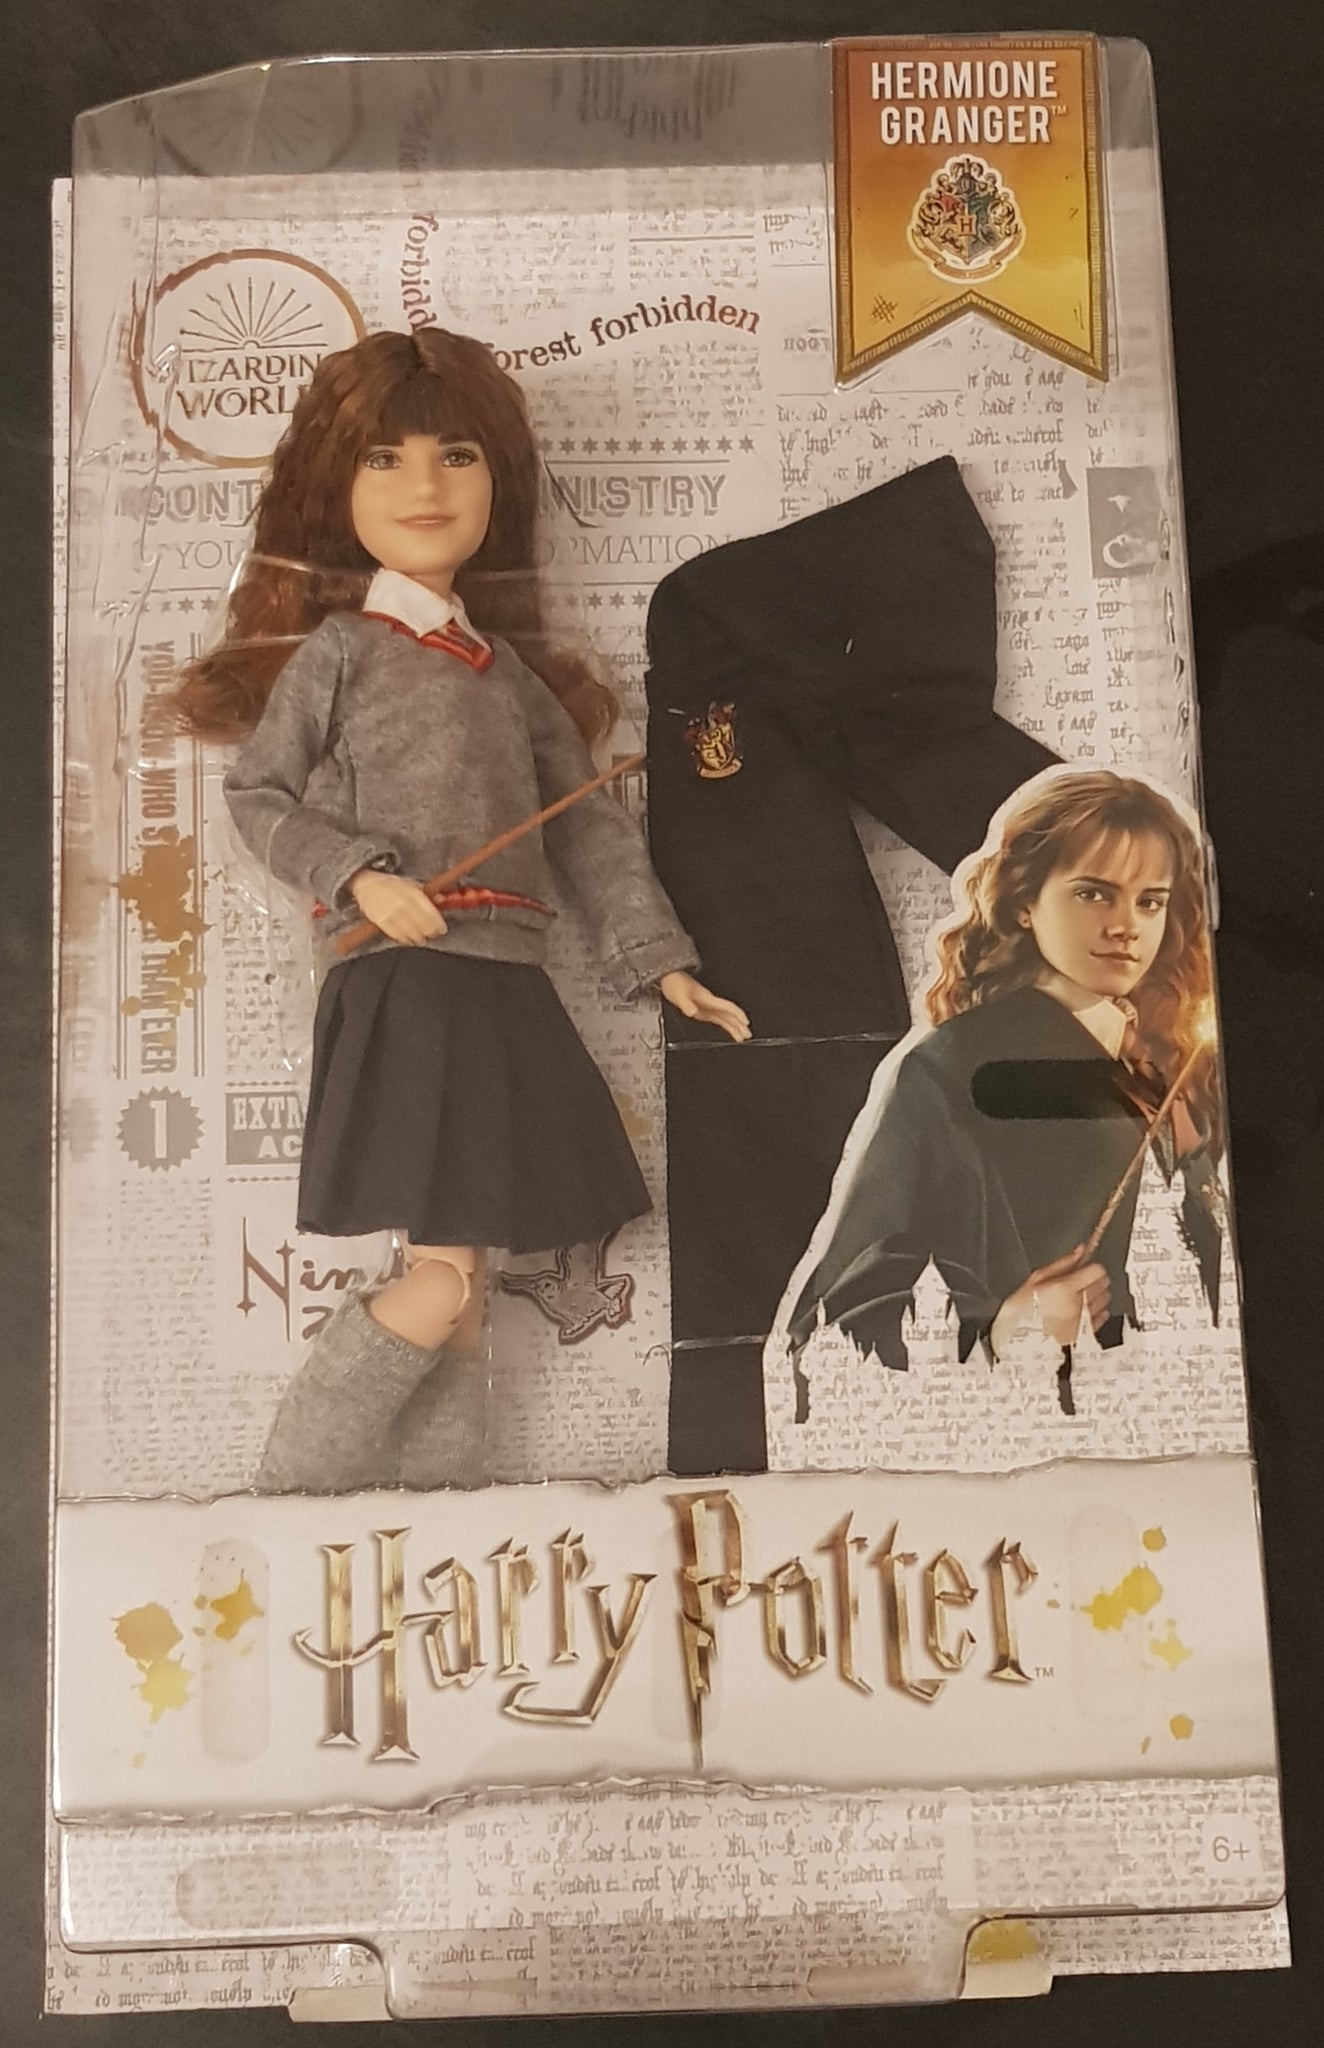 Harry Potter Wizarding World Hermione Granger 10" Collectors Doll